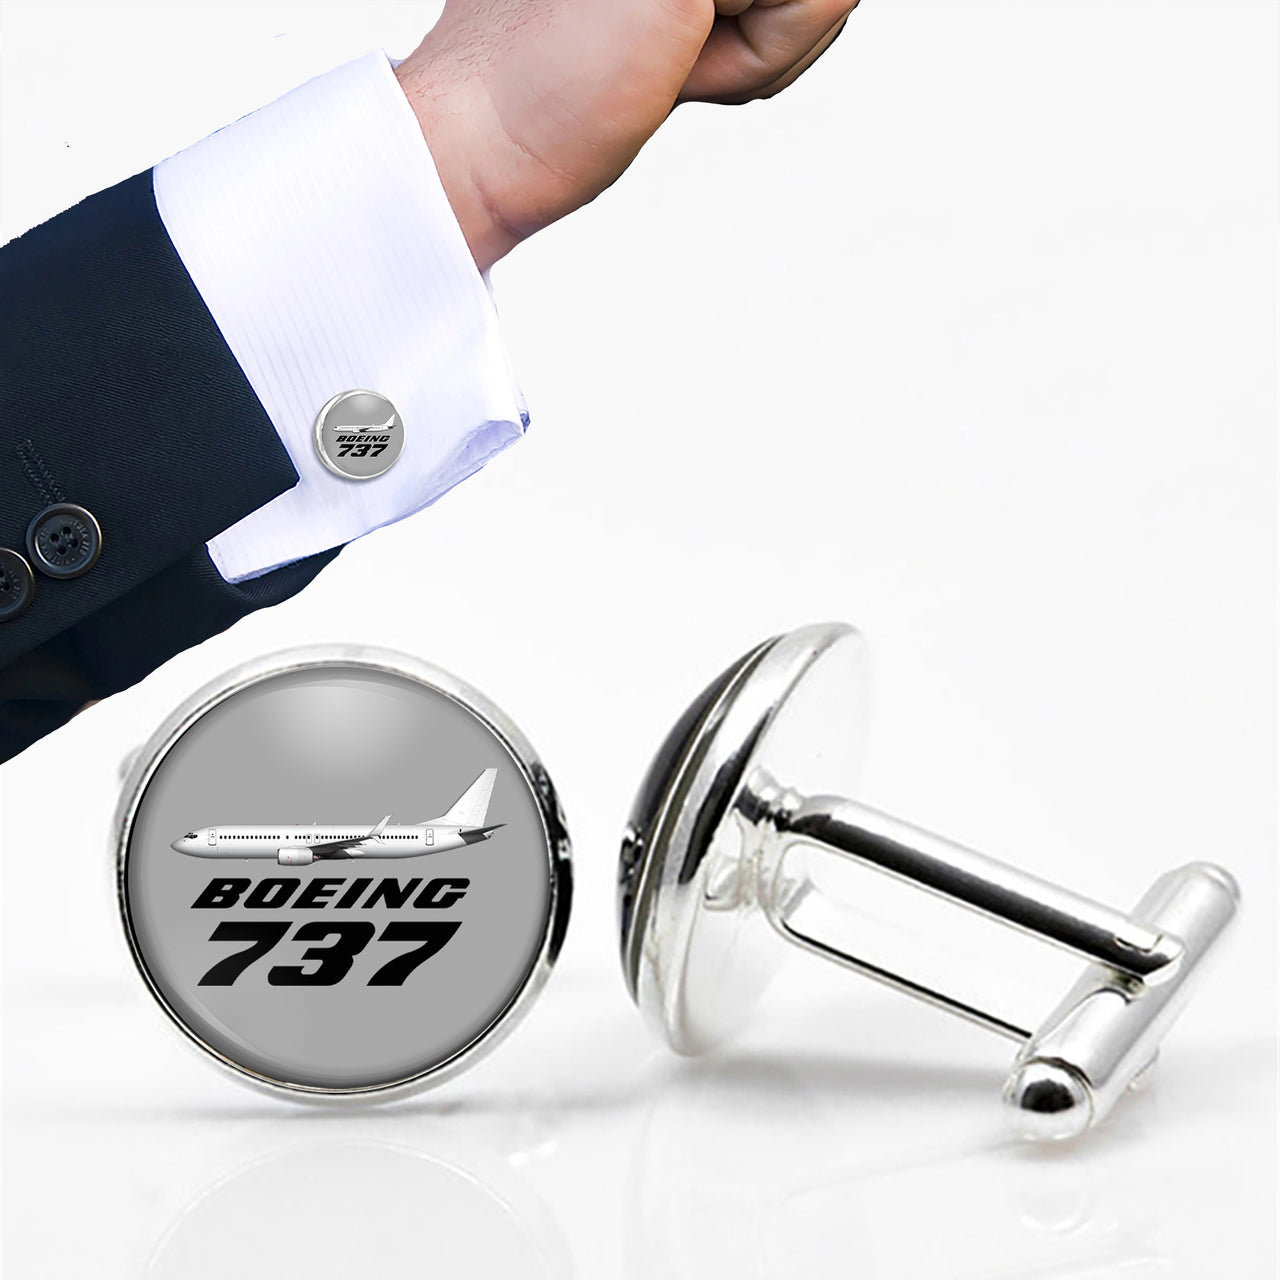 The Boeing 737 Designed Cuff Links